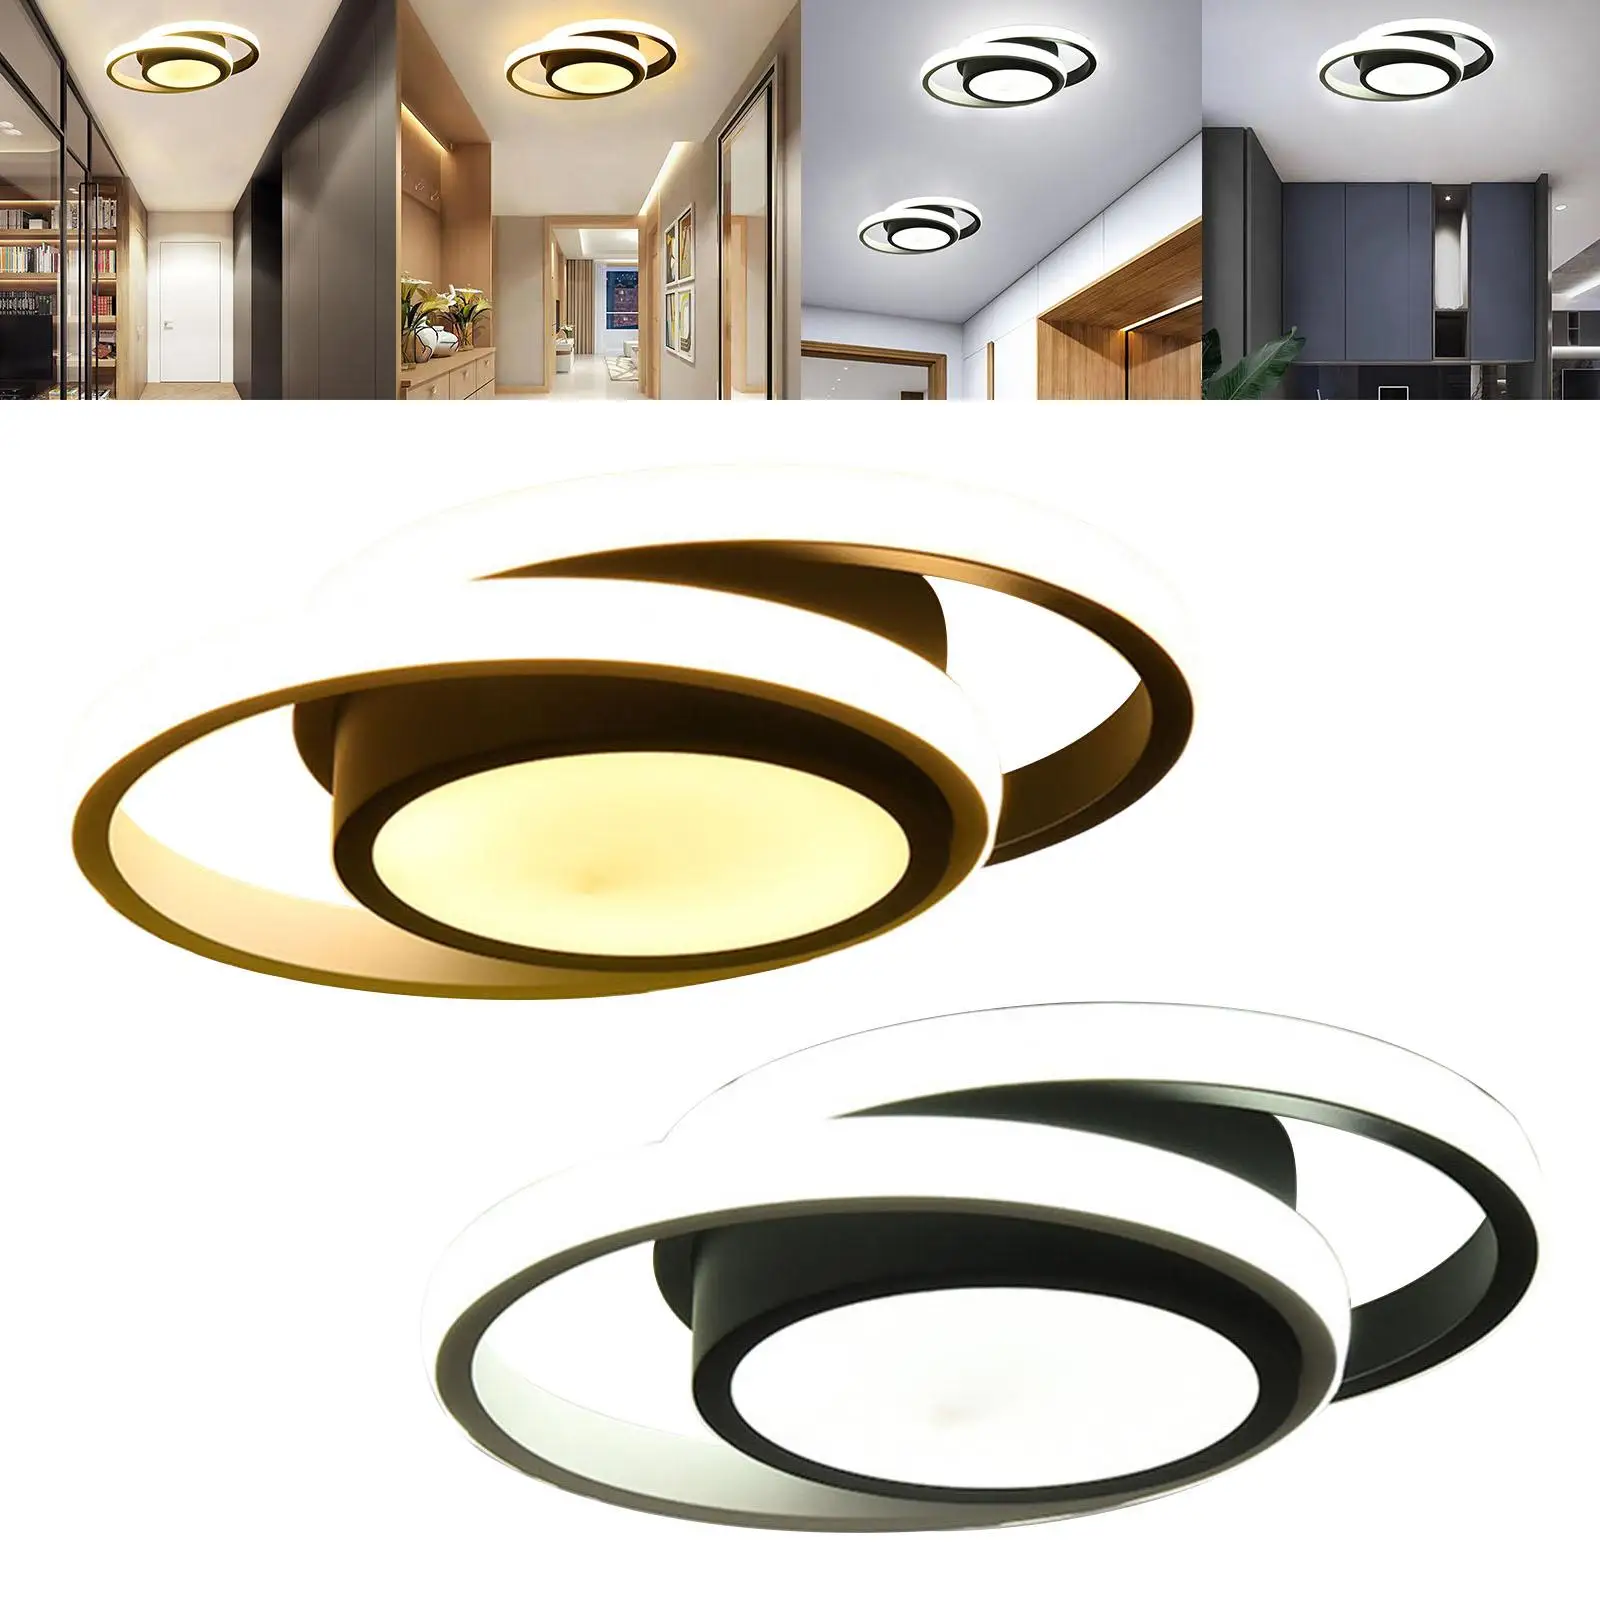 Nordic LED Ceiling Light Chandelier Fixtures Surface Mounted Pendant Light for Aisle Porch Corridor Dining Room Bathroom